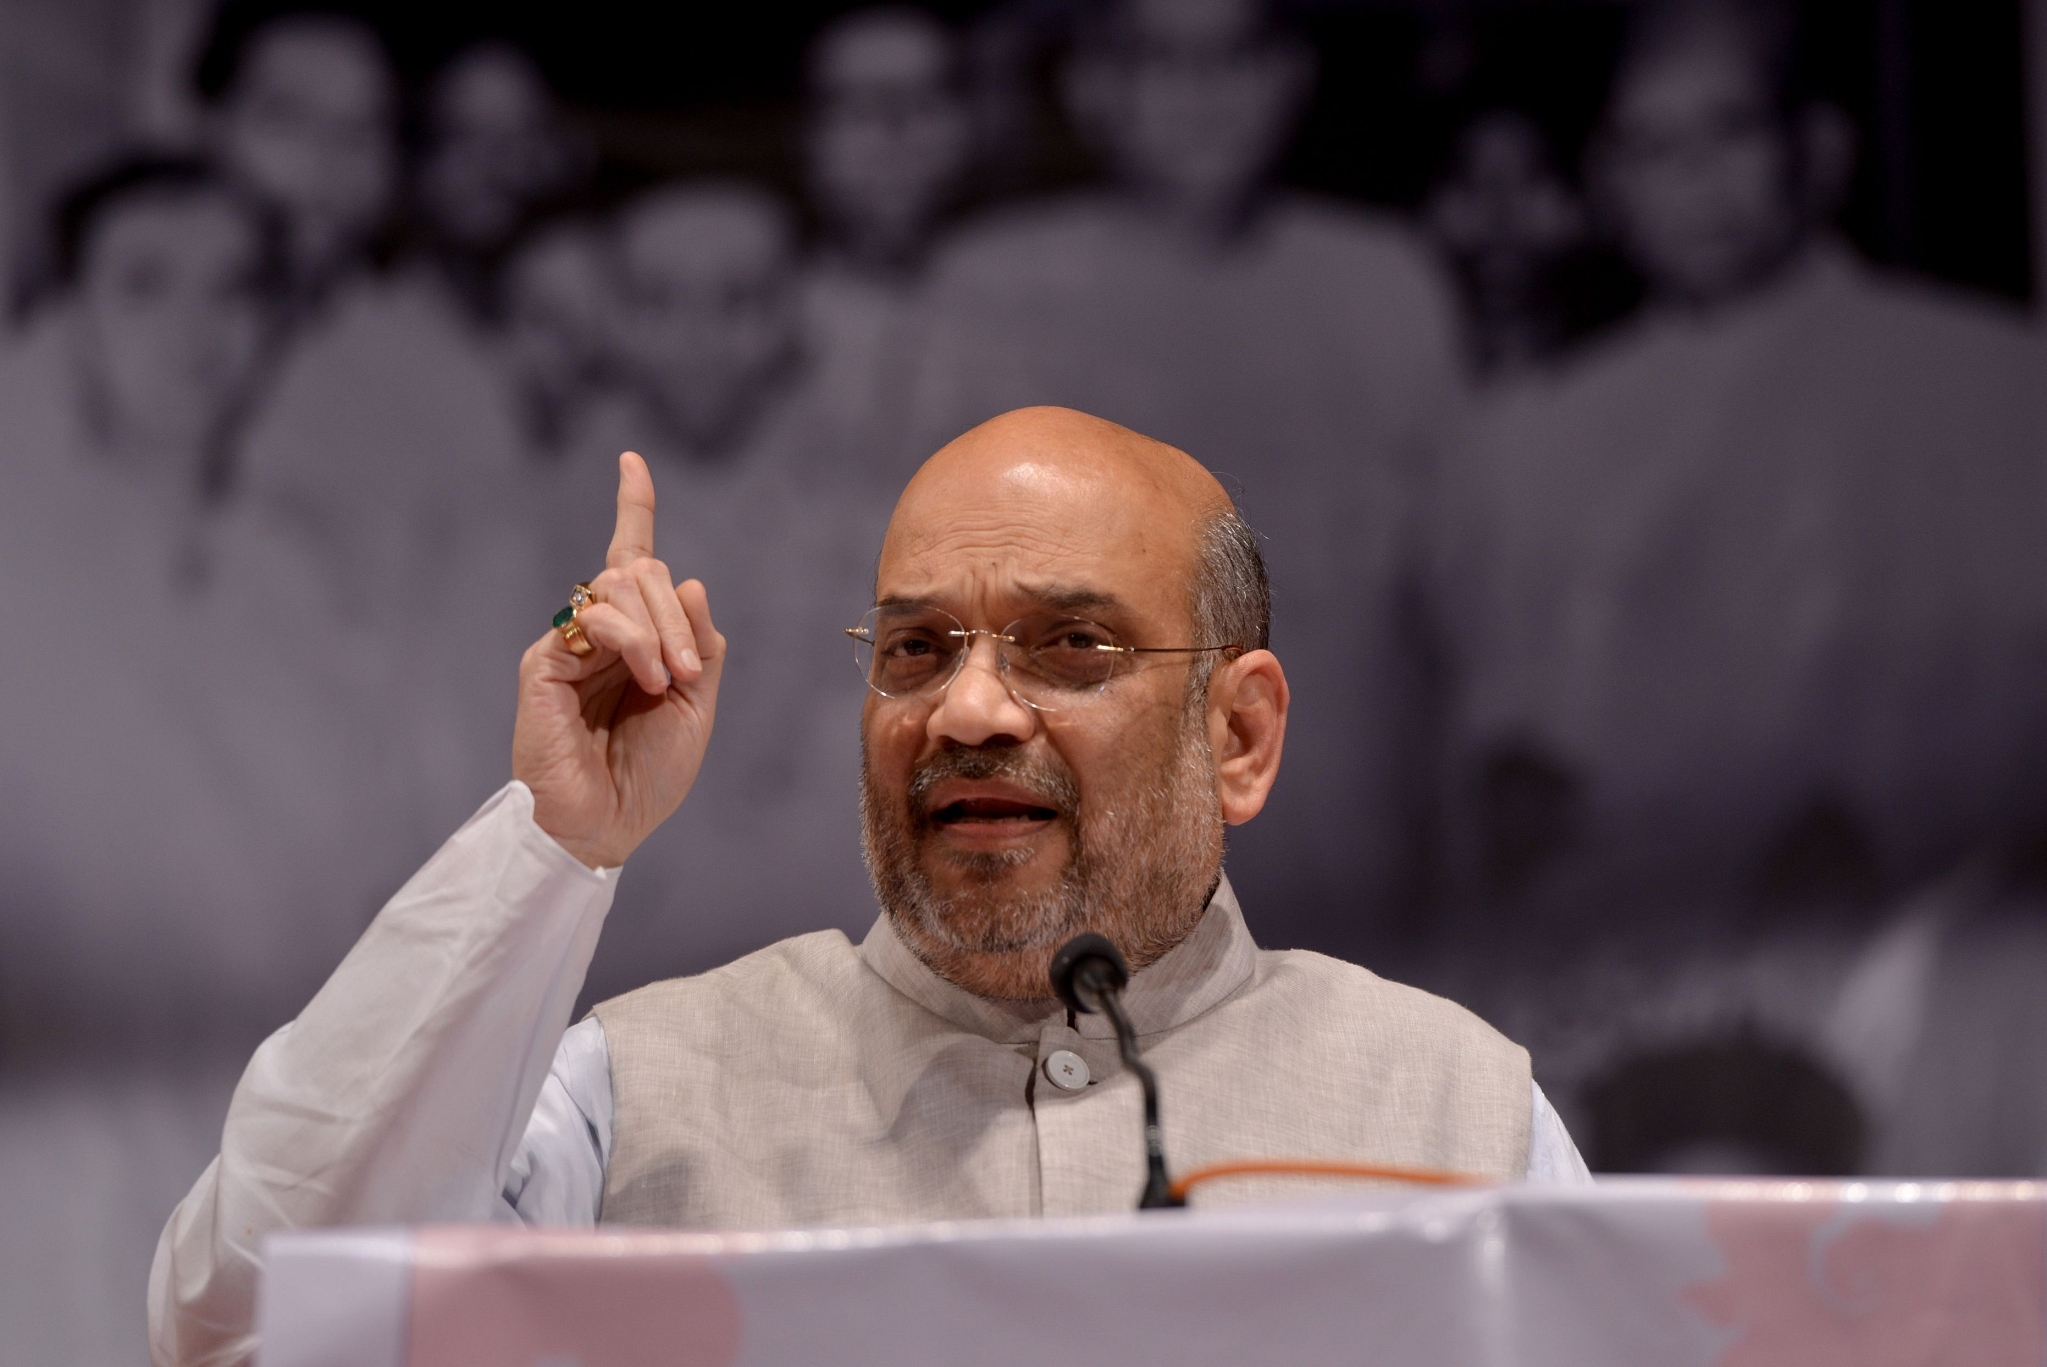 Amit Shah addressing party workers in West Bengal (Photo by Milind Shelte/India Today Group/Getty Images)